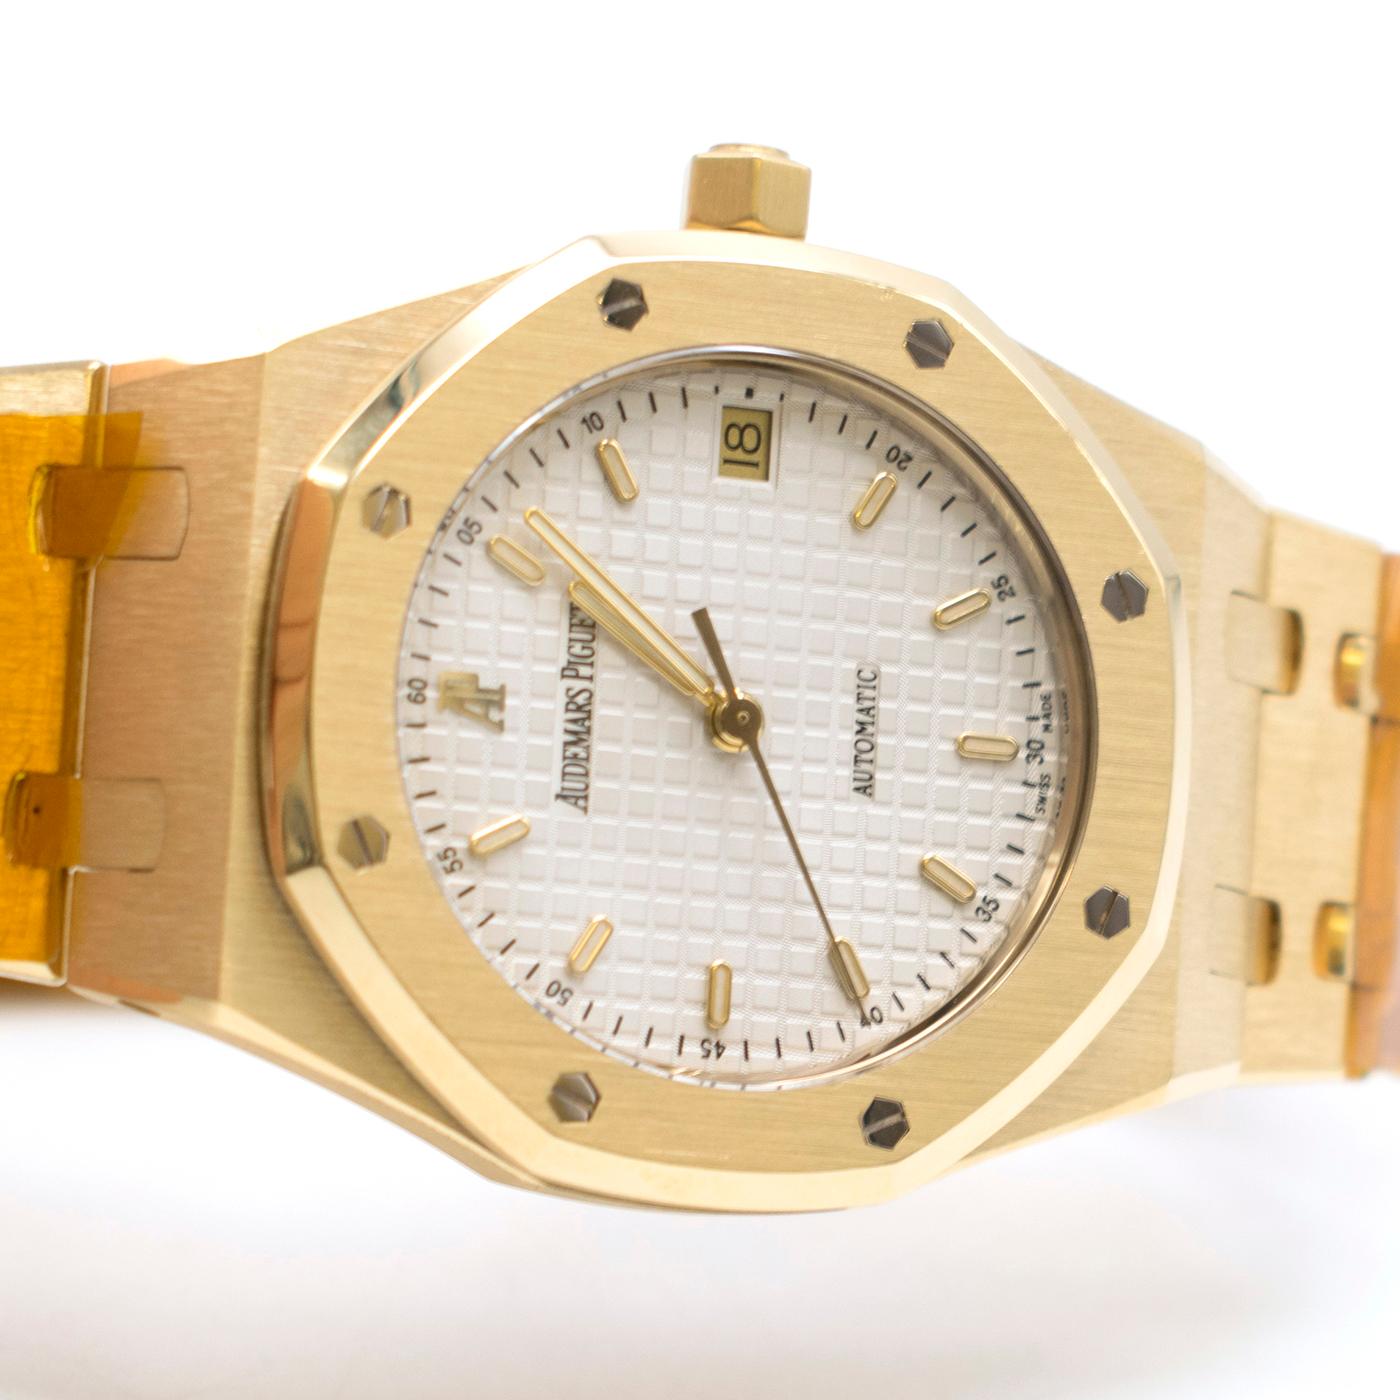 Audemars Piguet 37mm Octagonal Royal Oak 18K Yellow Gold Watch

- Automatic movement
- Swiss Made
- Octagonal White Dial
- 37mm 
- 18ct Yellow Gold Strap and Case
-Sapphire crystal glass face
- Triple Folding Clasp
- Water resistant to 500m

Please